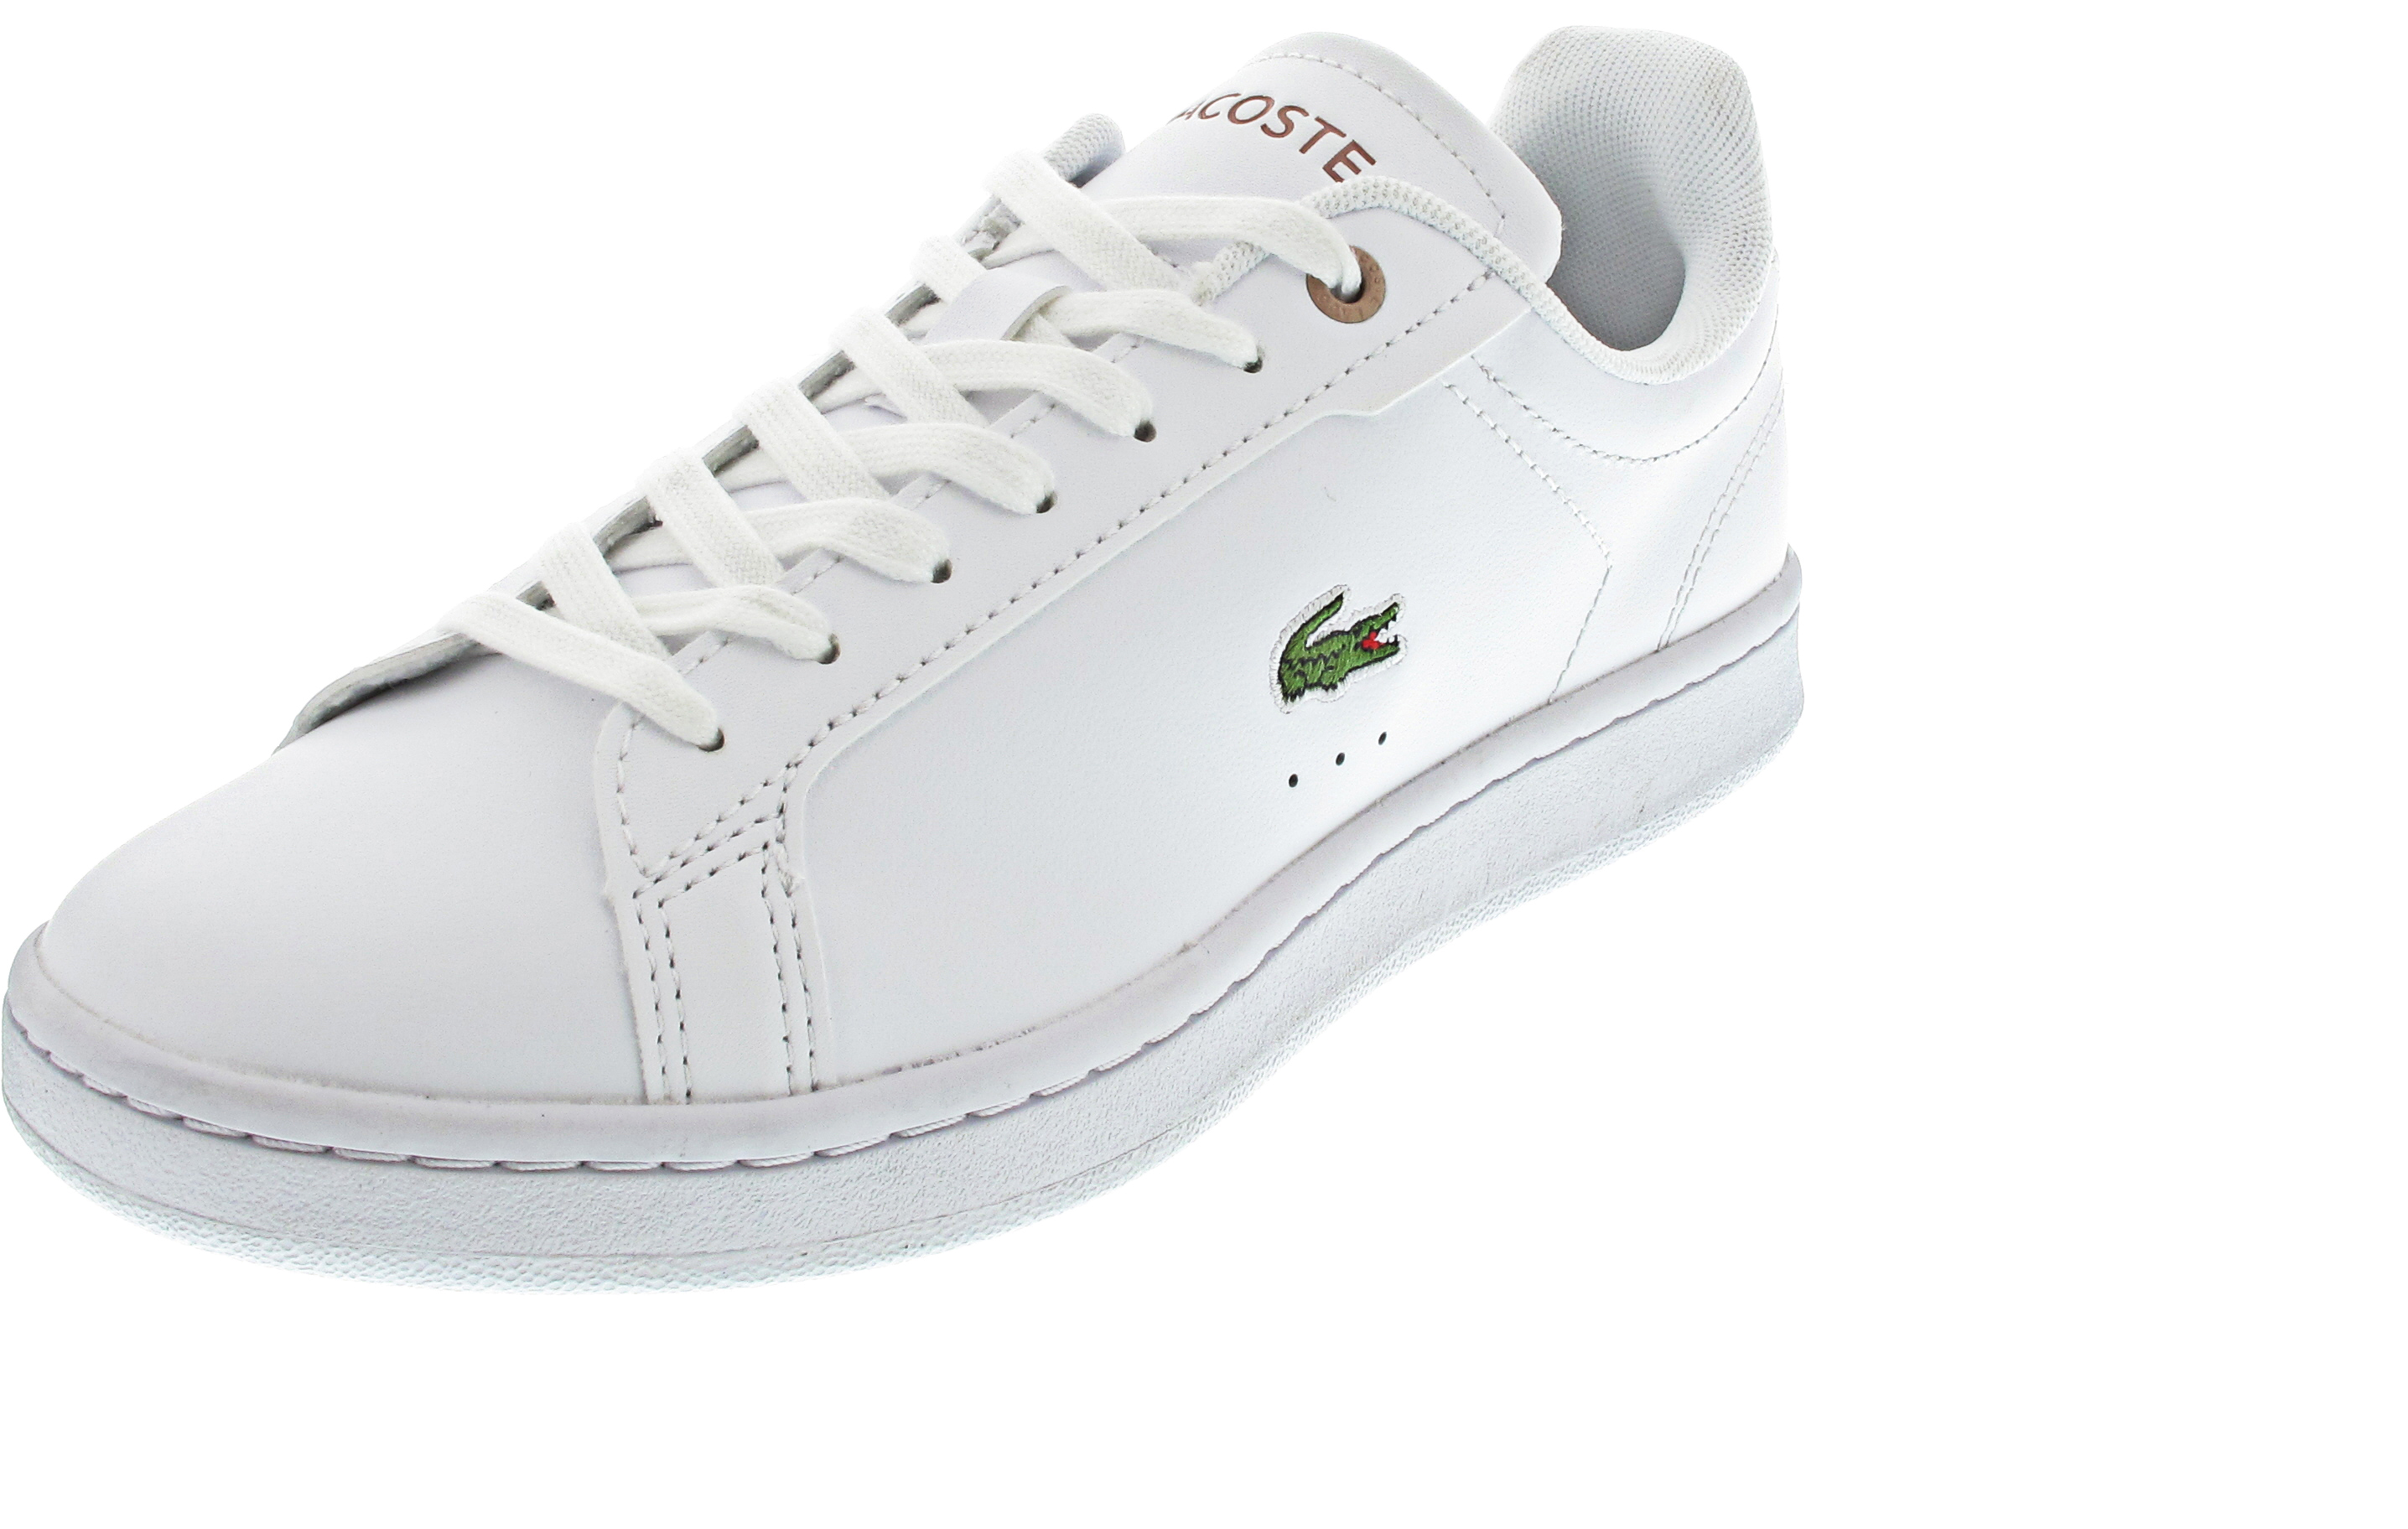 Lacoste Carnaby Pro BL Leather To